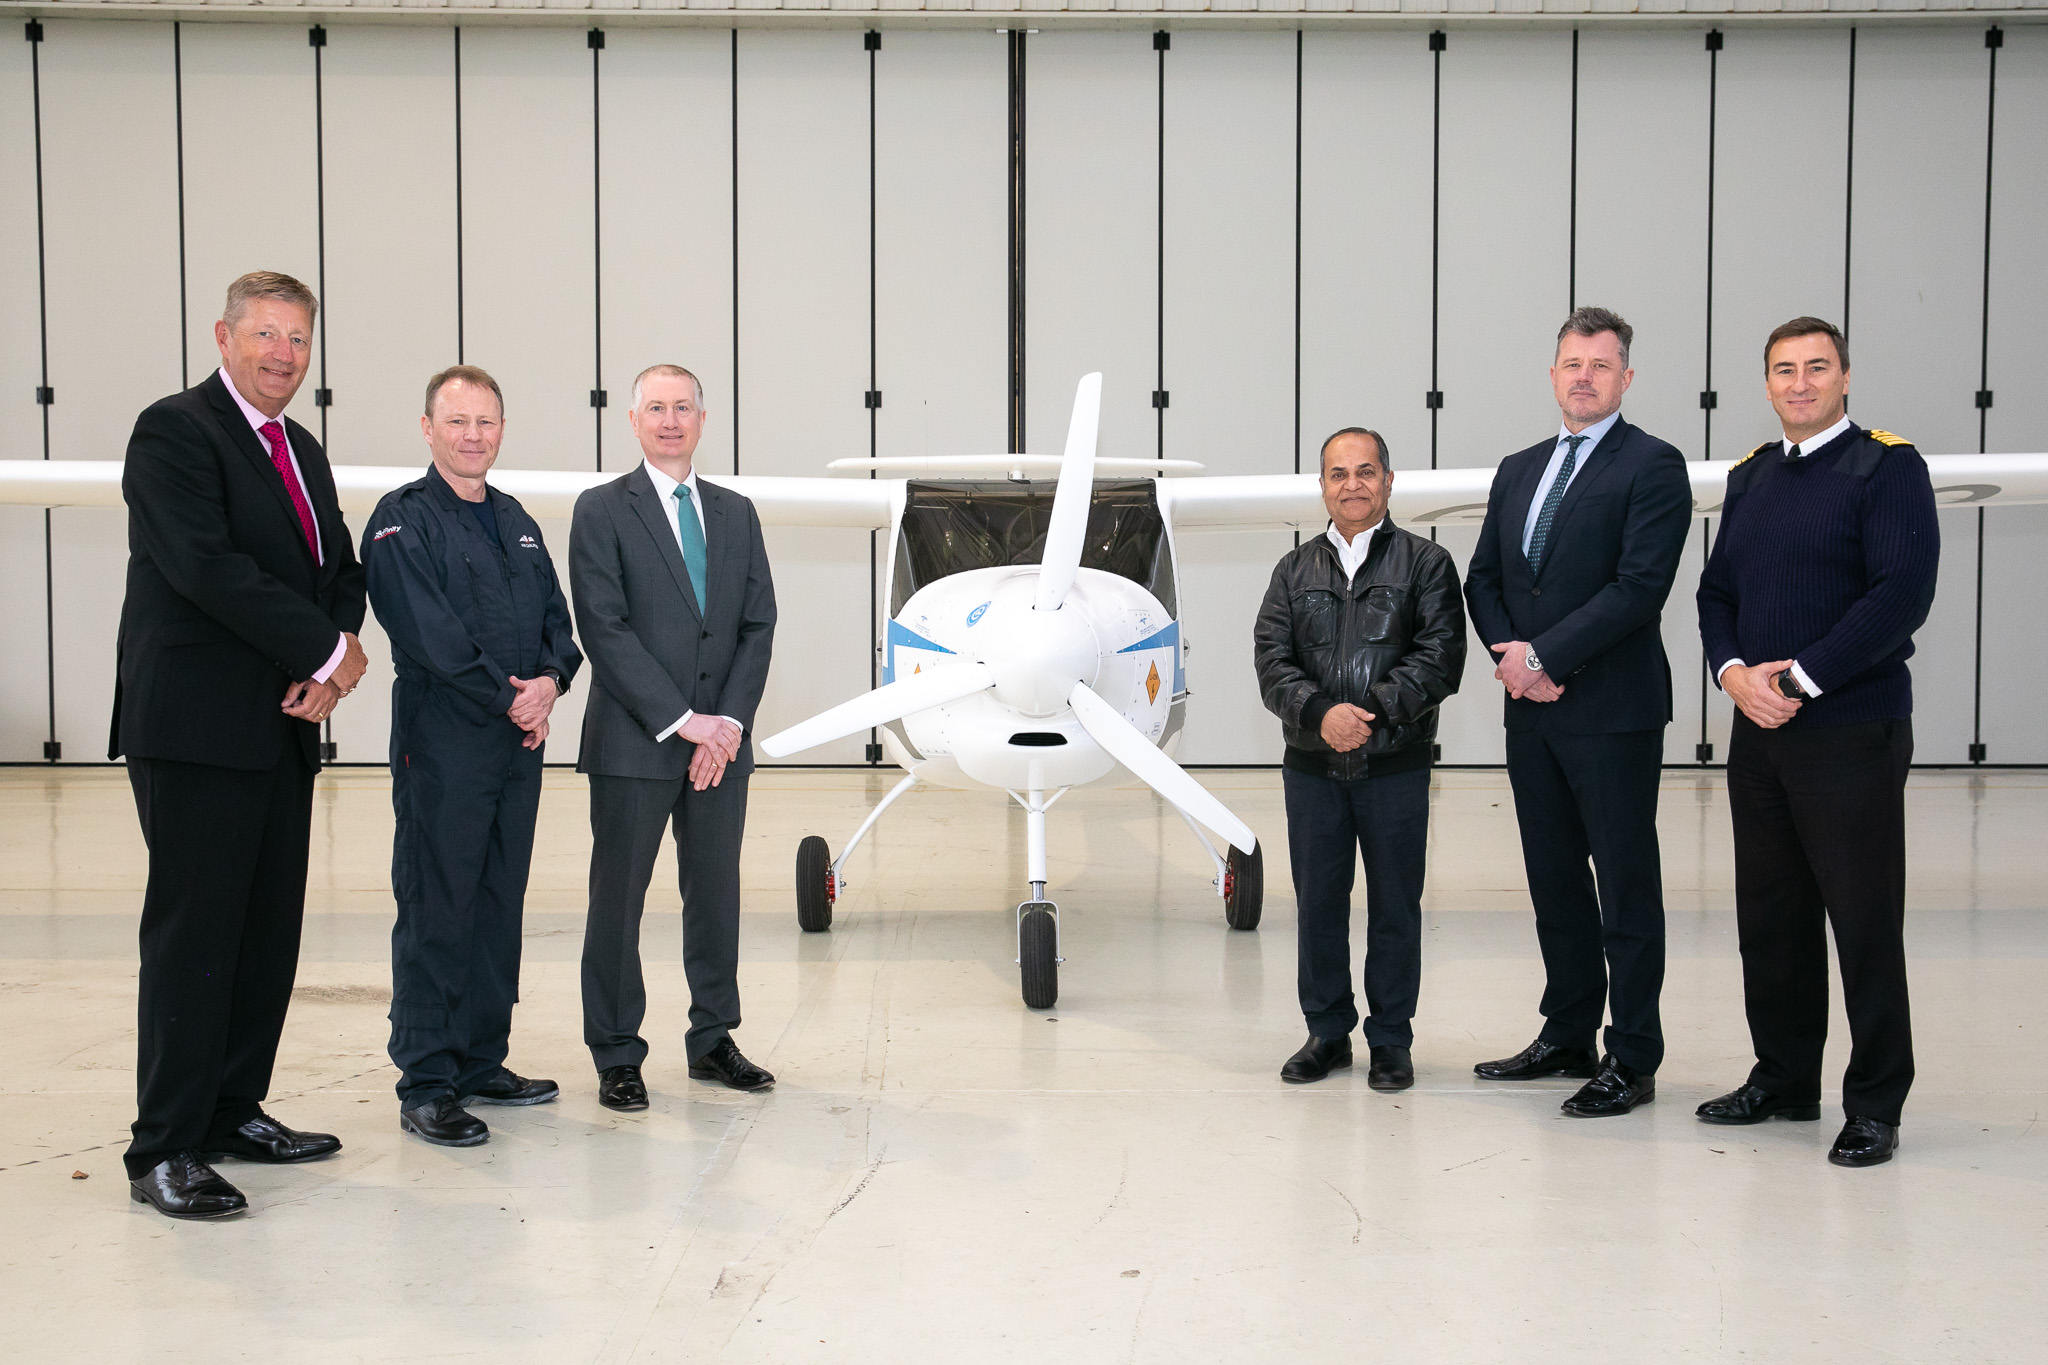 Pilots stand with electric aircraft inside hangar.